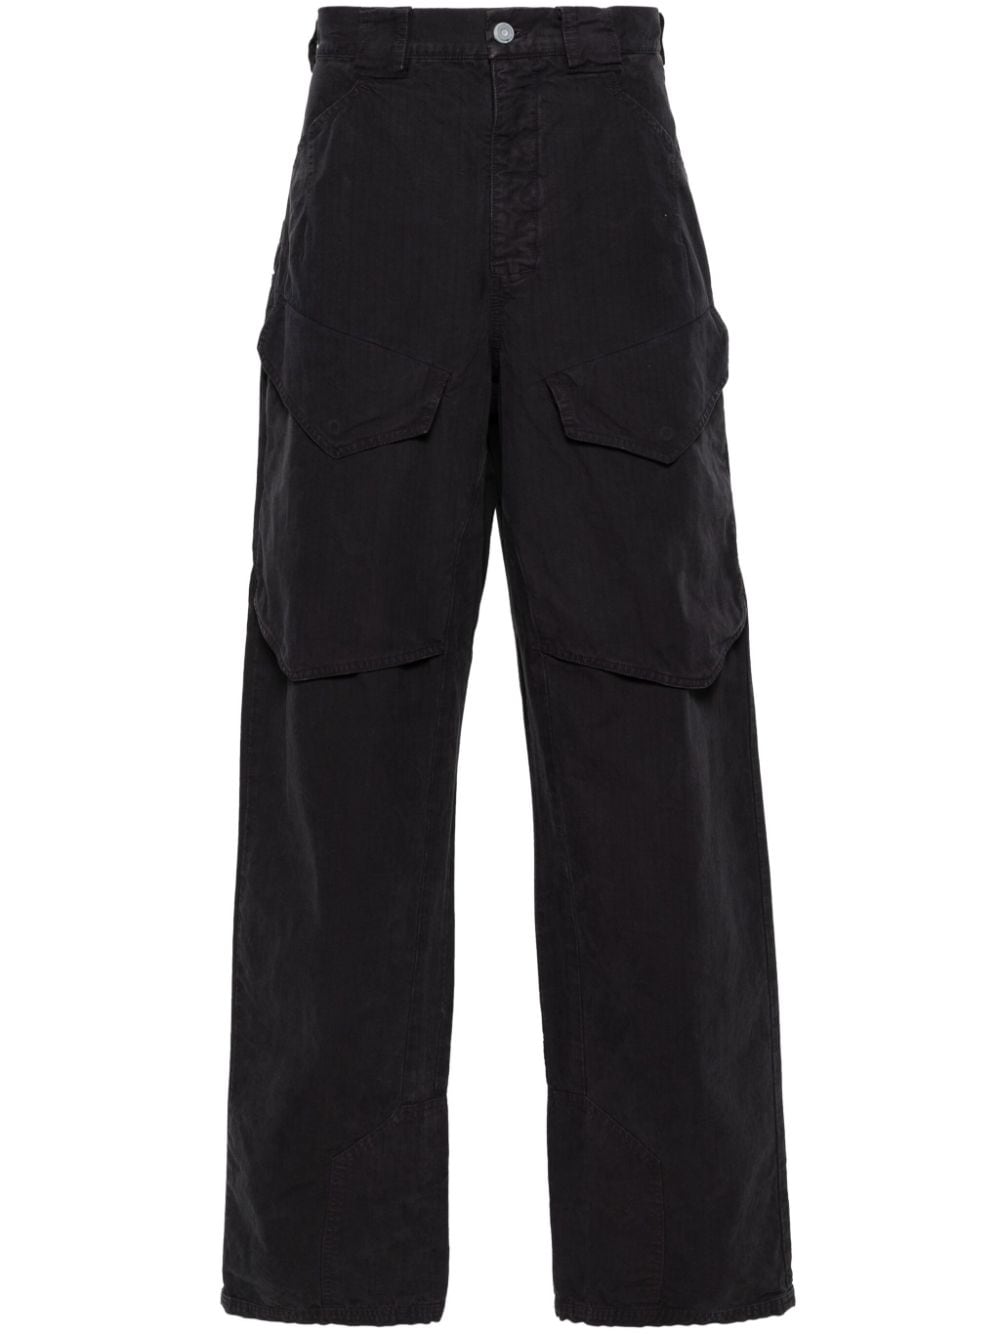 OBJECTS IV LIFE Hiking wide-leg trousers - Grey von OBJECTS IV LIFE